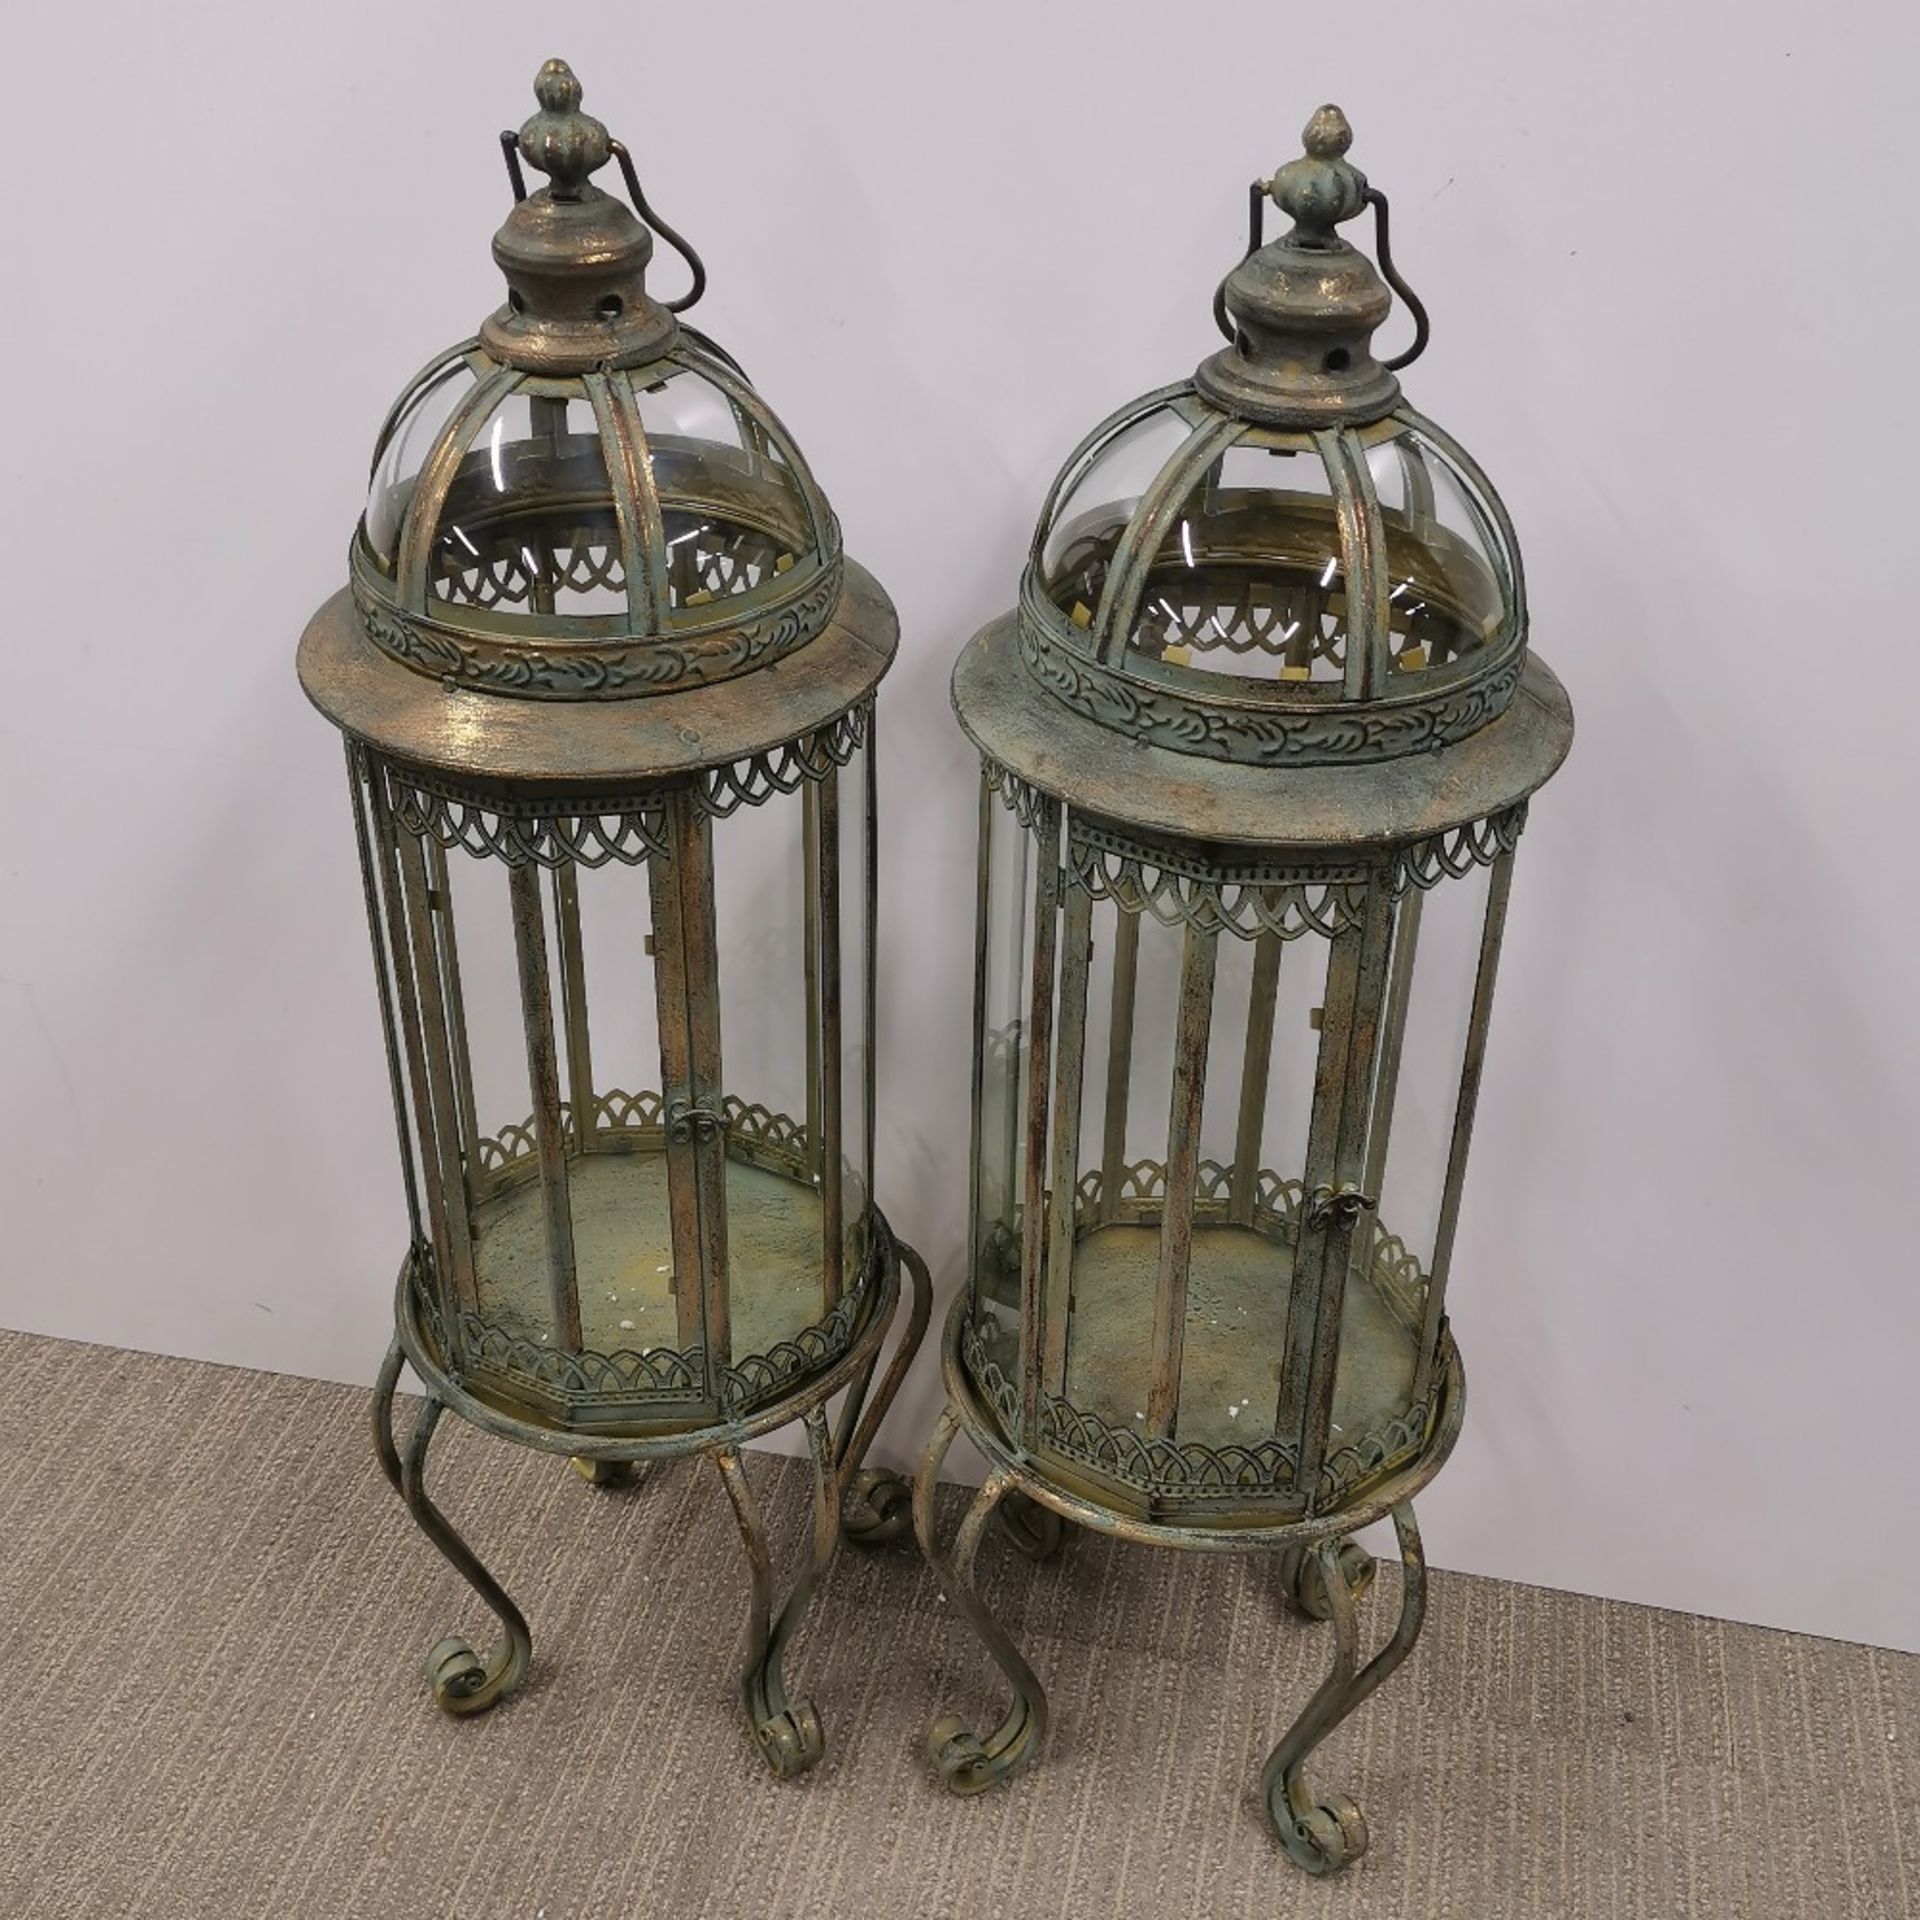 A pair of metal and glass garden storm lanterns, H. 80cm. - Image 2 of 3